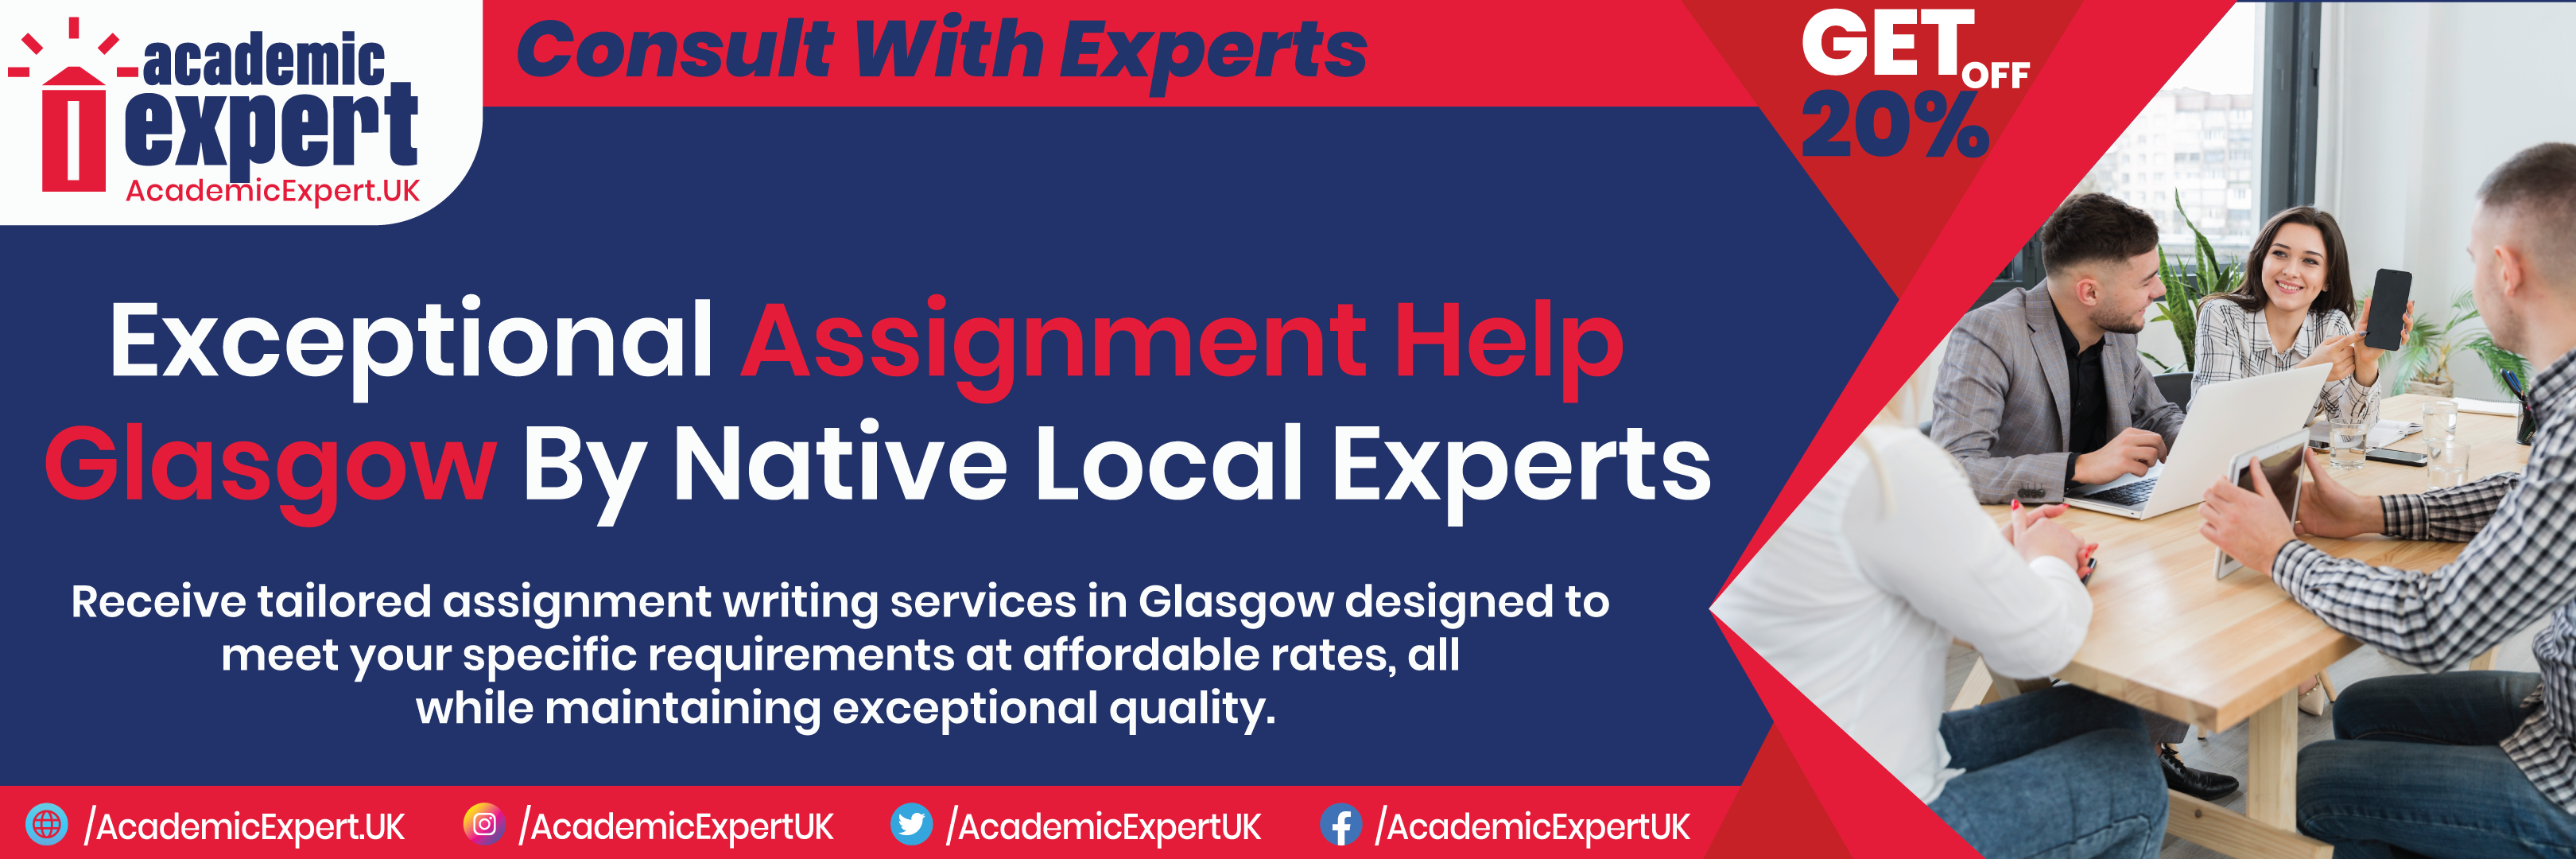 Exceptional Assignment Help Glasgow By Native Local Experts